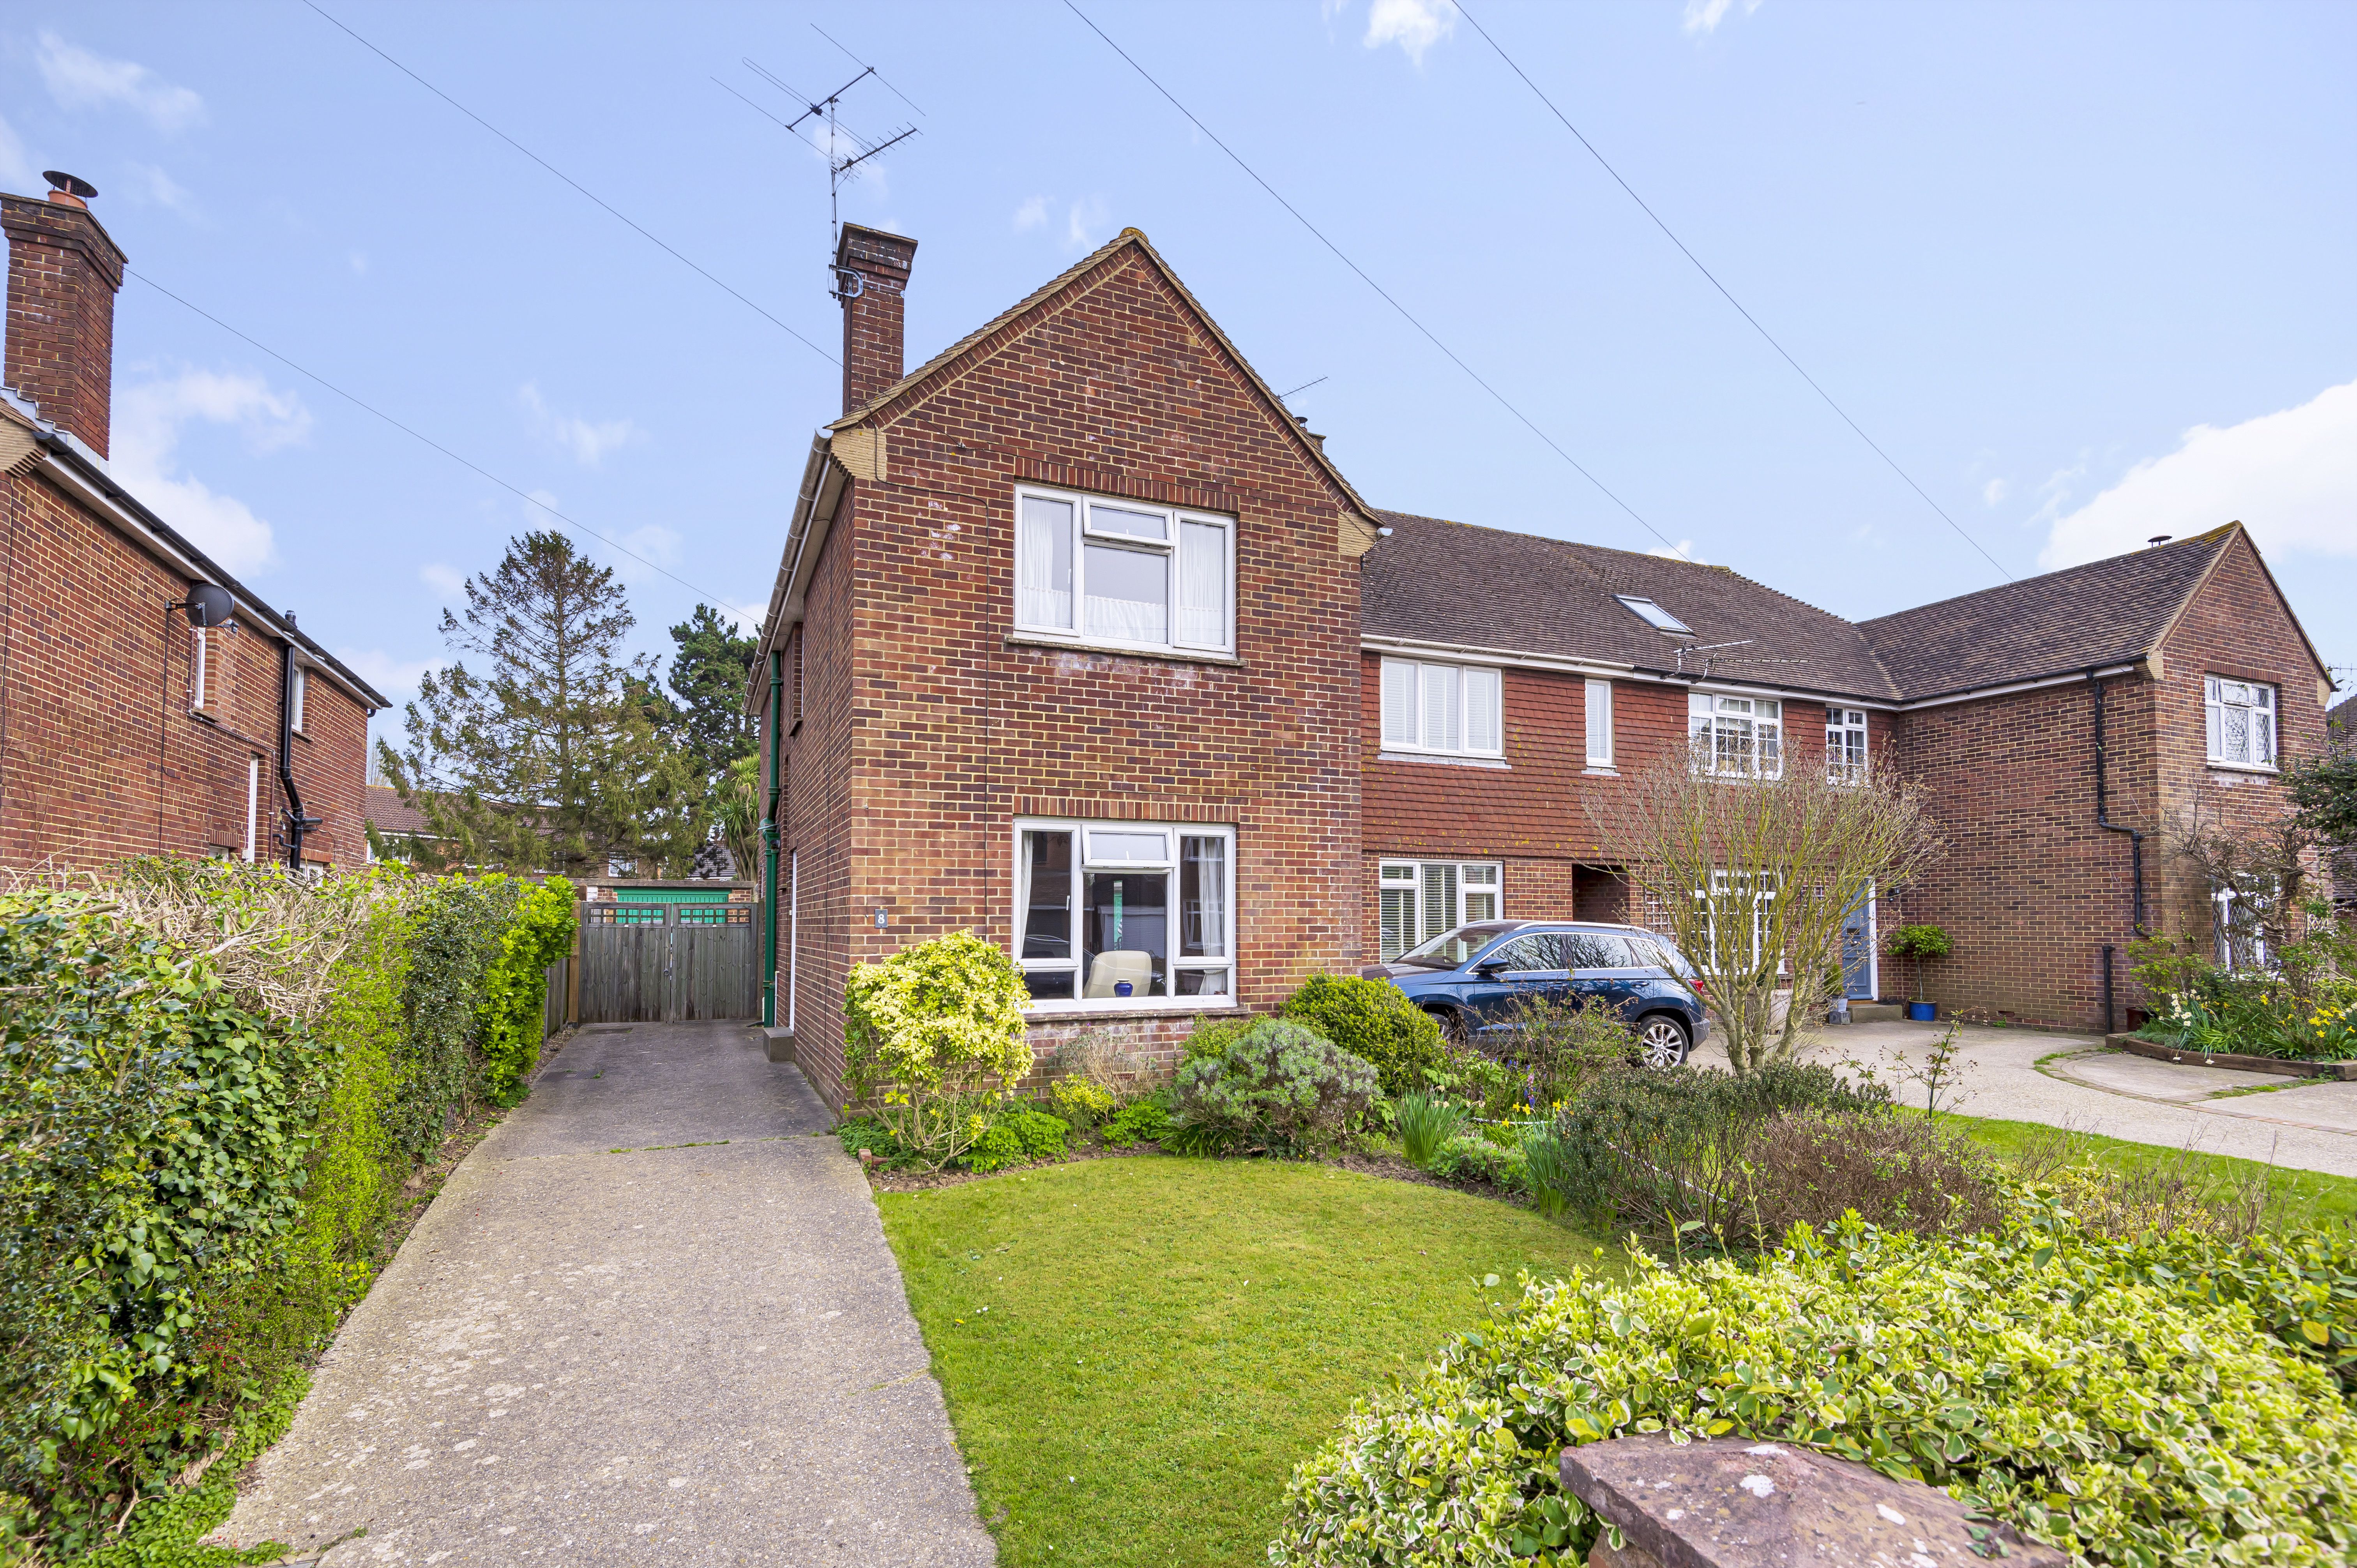 3 bed house for sale in Wiston Avenue, Chichester - Property Image 1